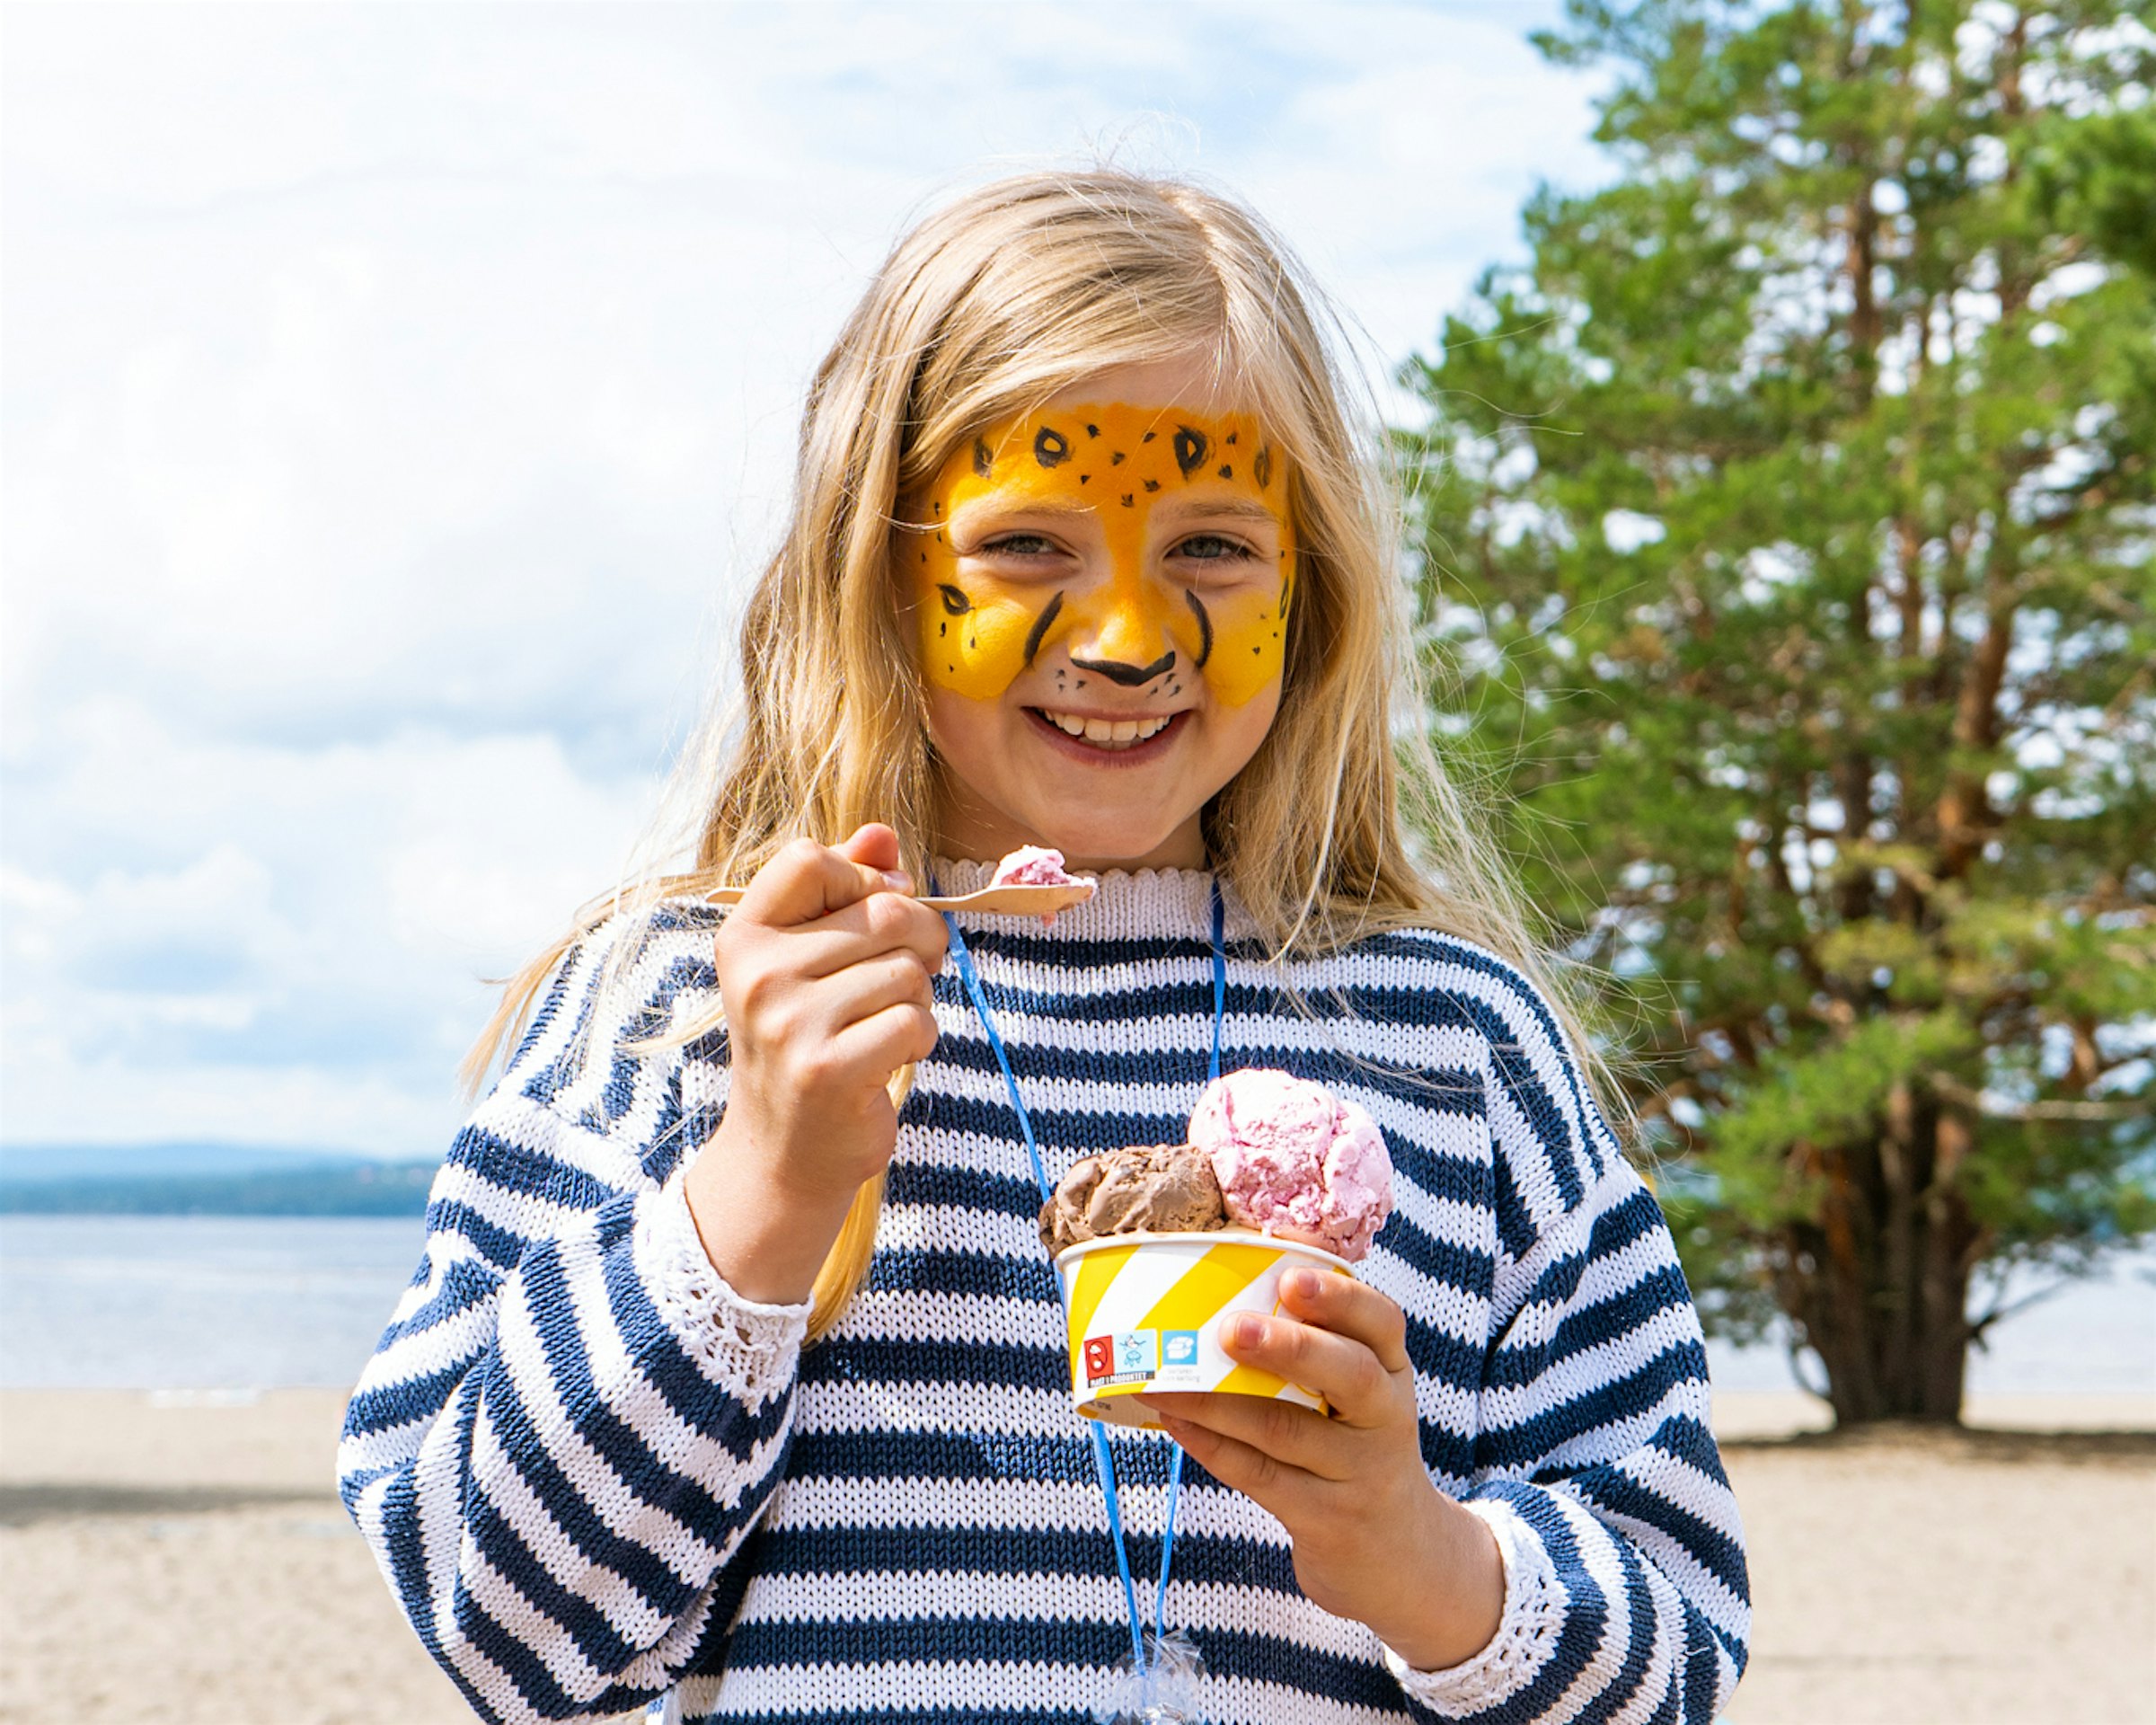 Girl has had her face painted, eats ice cream and smiles. Photo